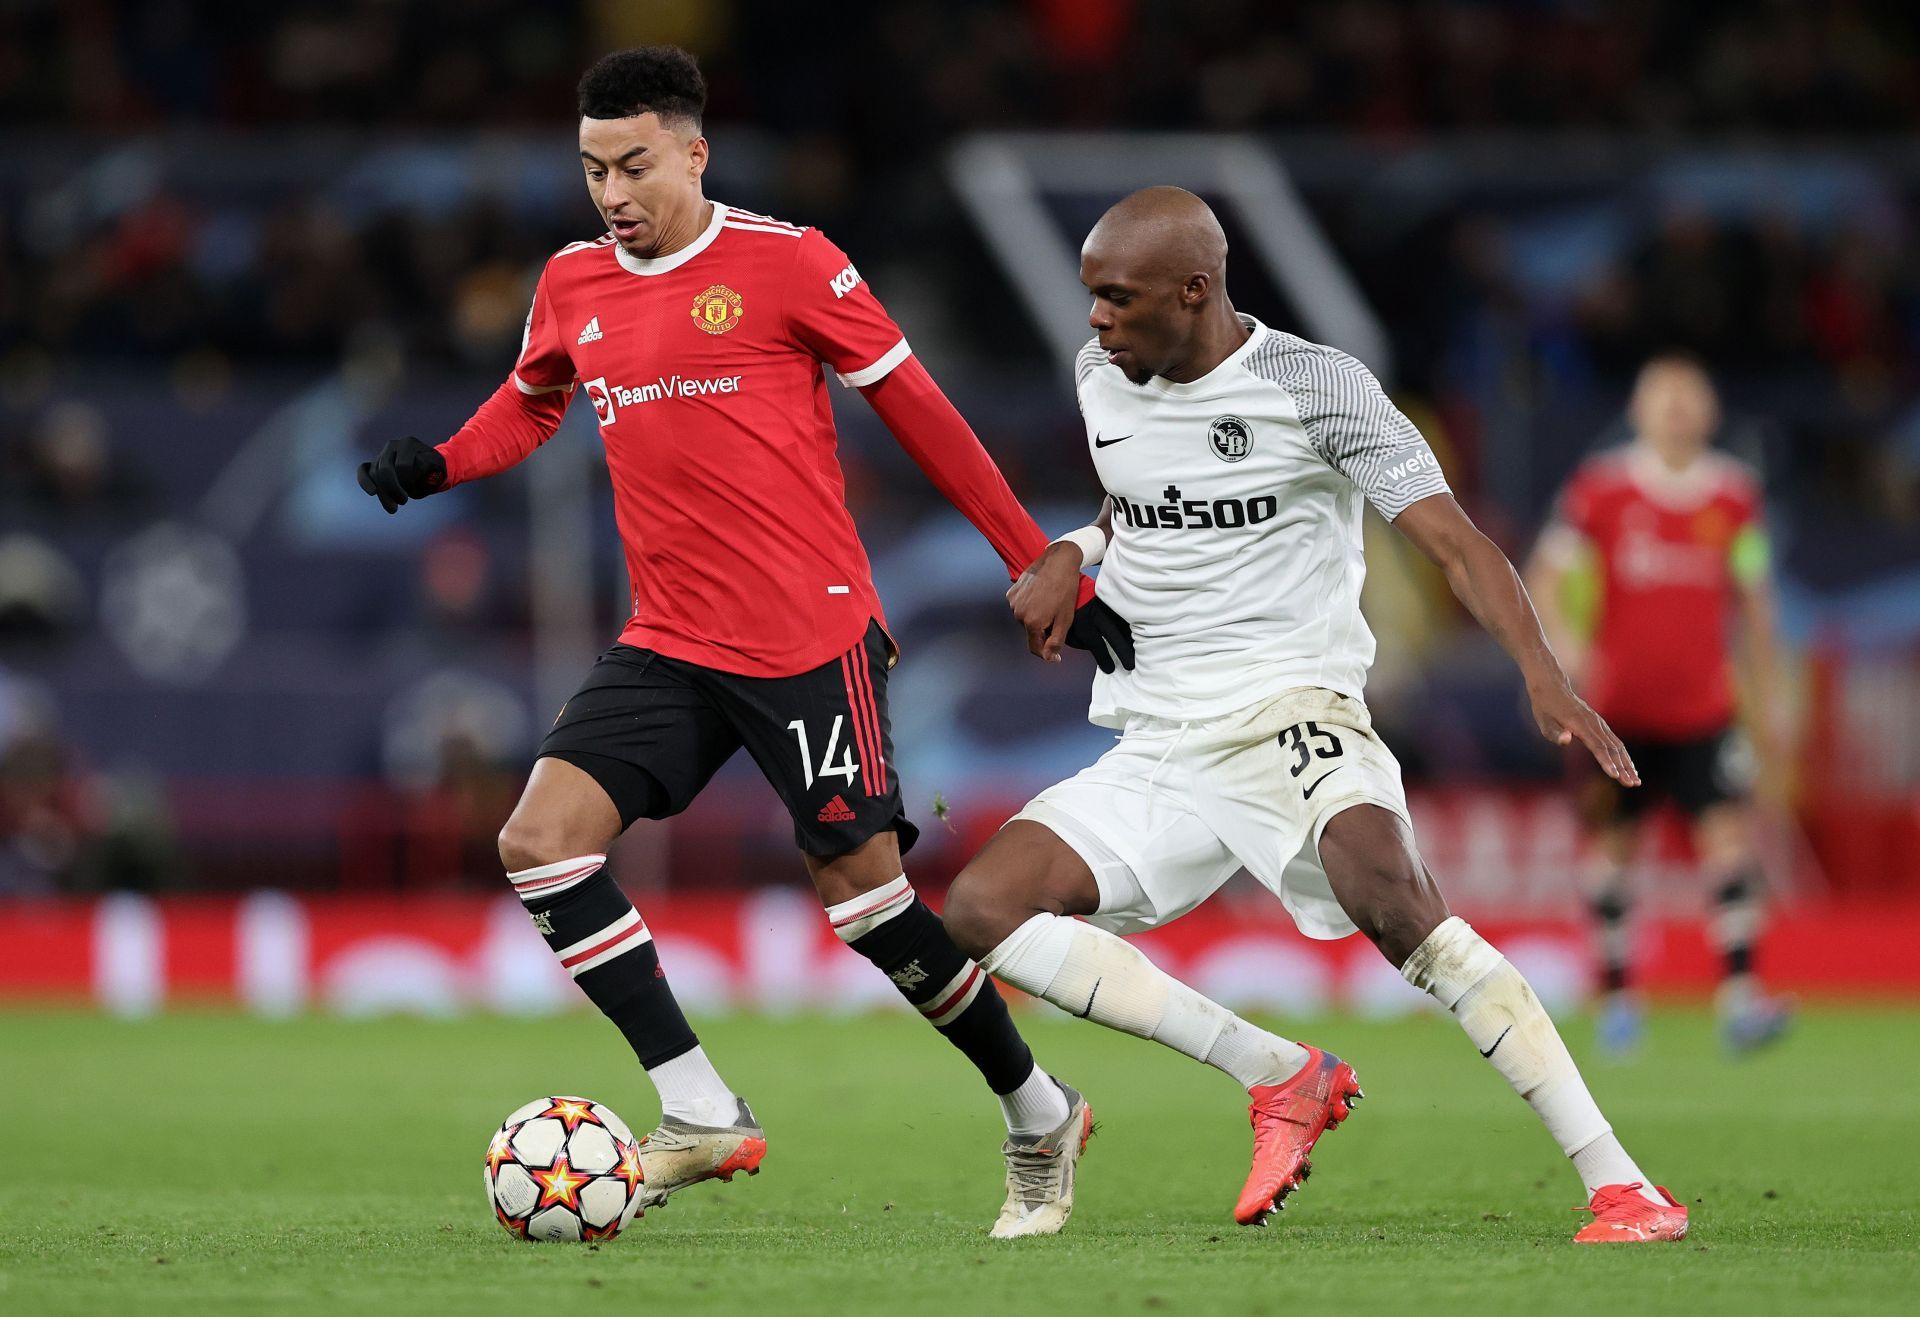 Lingard in action for Manchester United